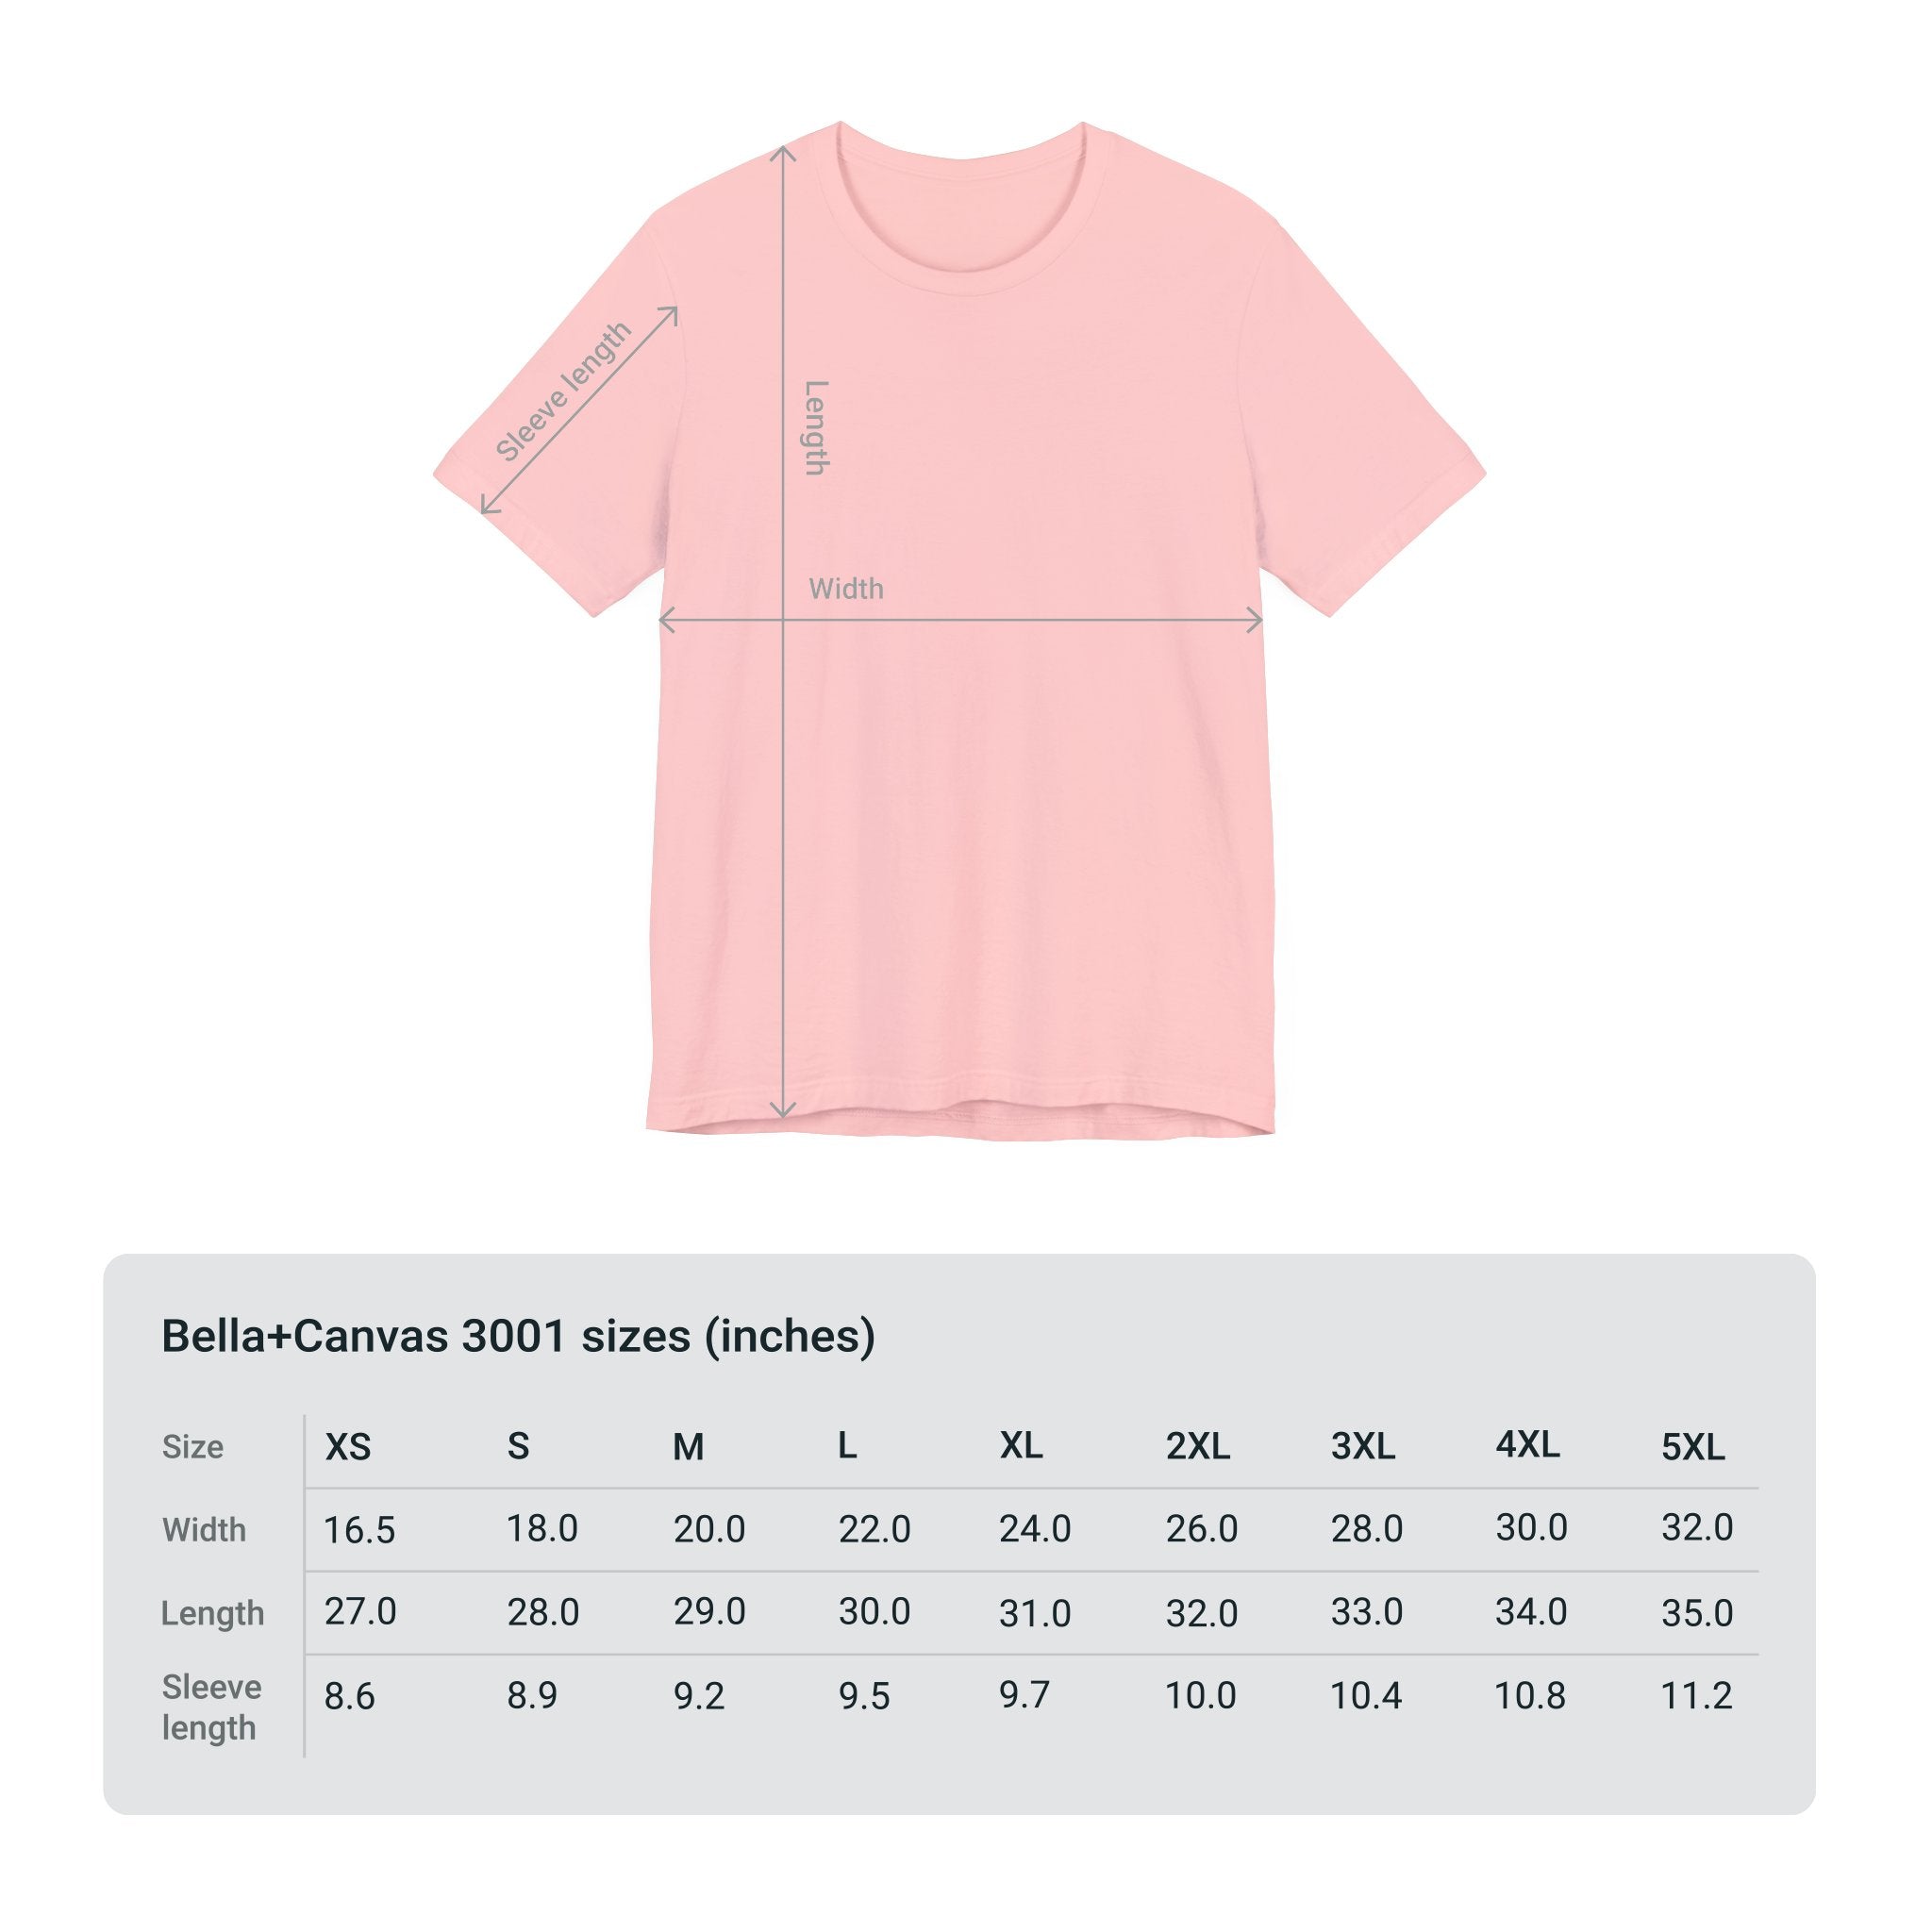 Adventure Unlimited Surfing T-Shirt with Size Measurements - Printed Direct-to-Garment - Soulshinecreators - Bella & Canvas - EU